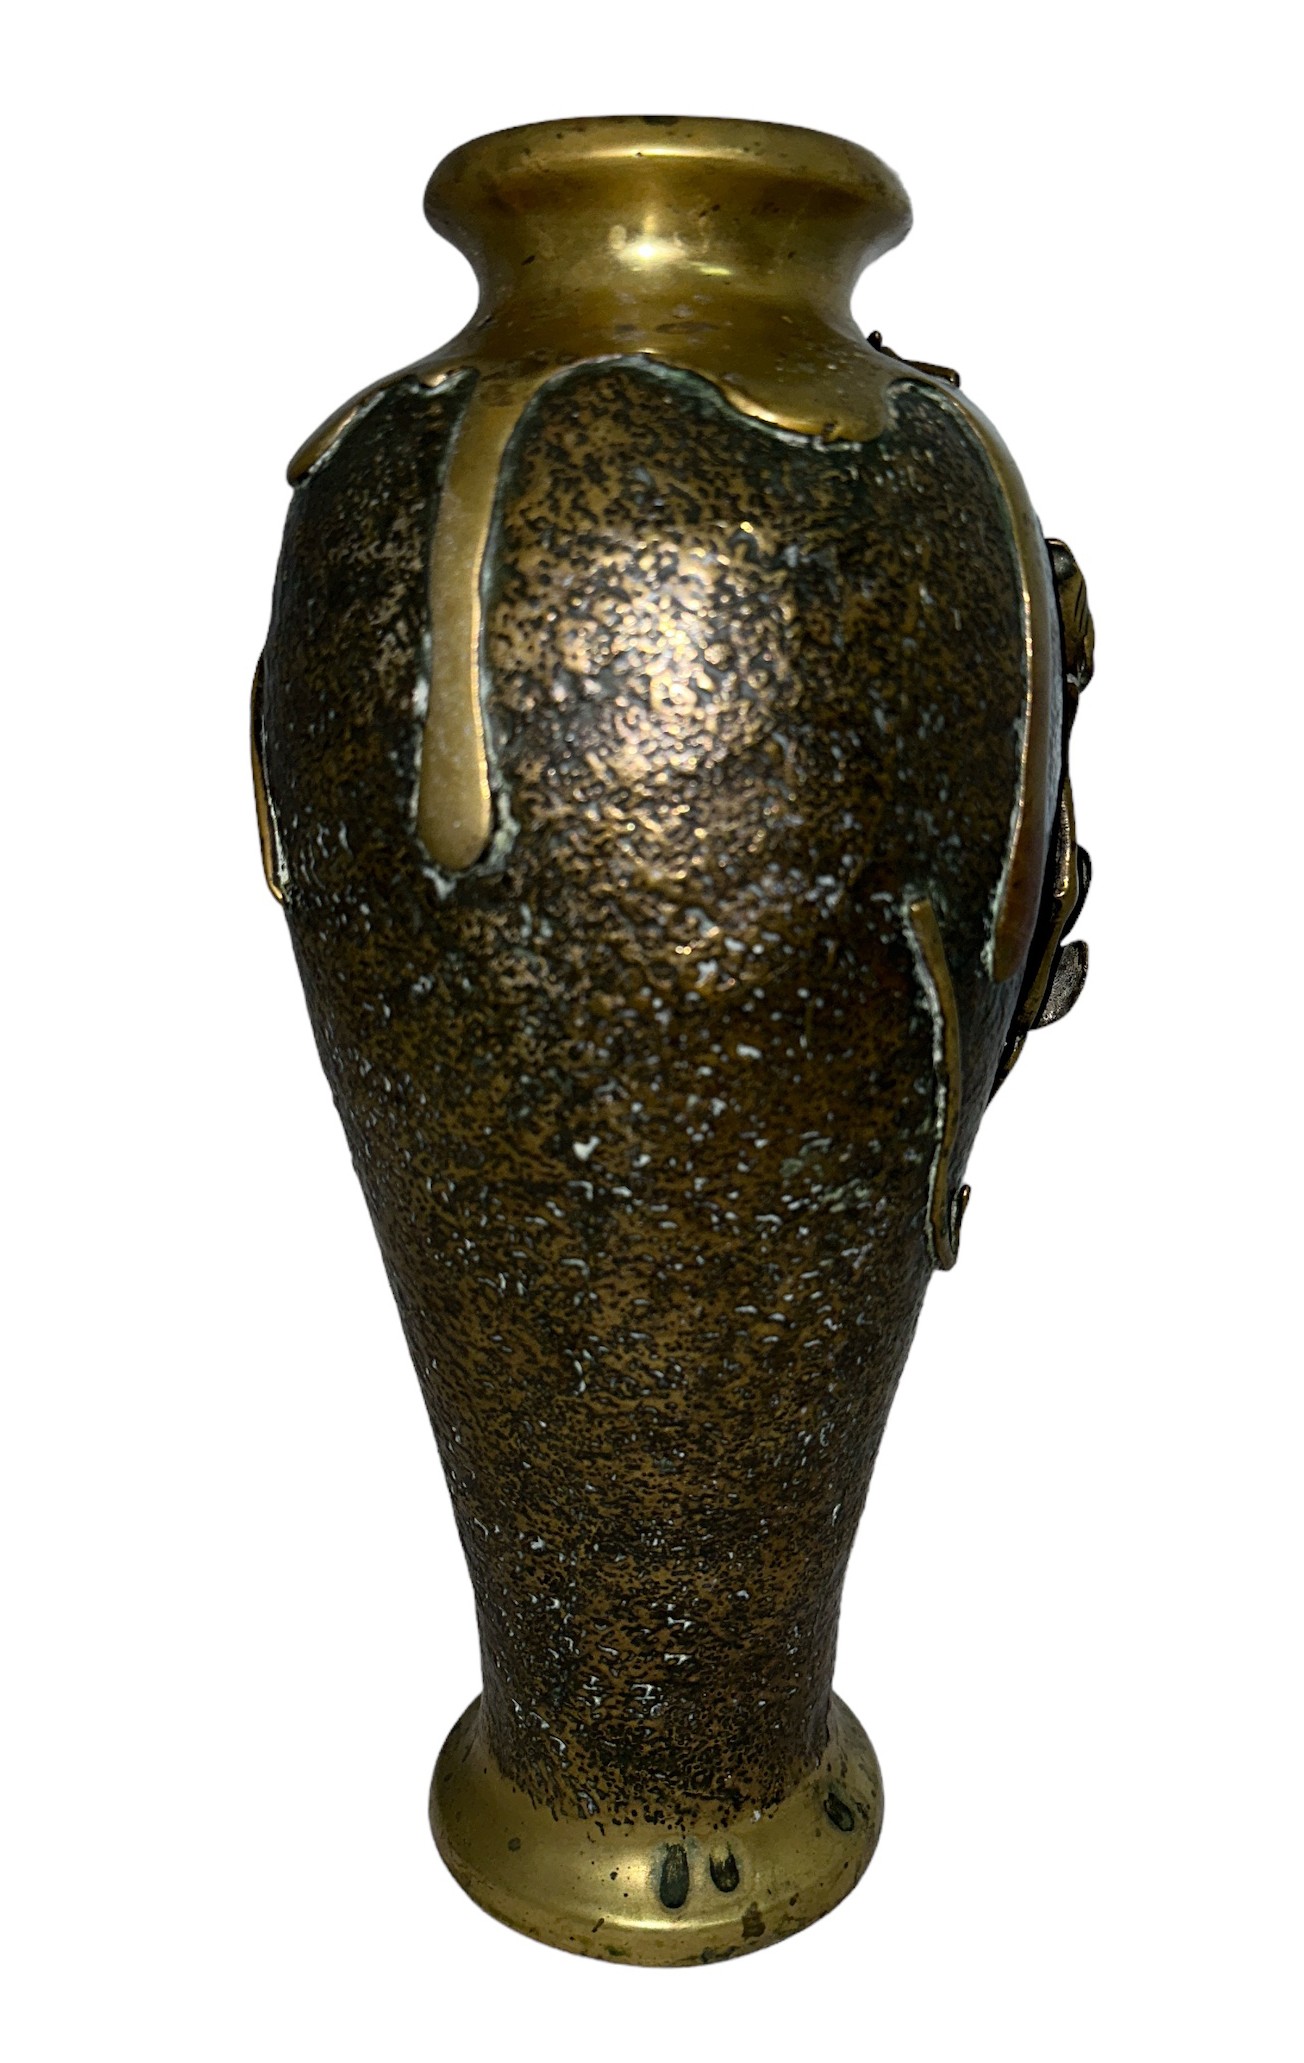 Japanese bronze floral vase, with floral and leaf relief decorations to side, marked to base. Heavy. - Image 2 of 3